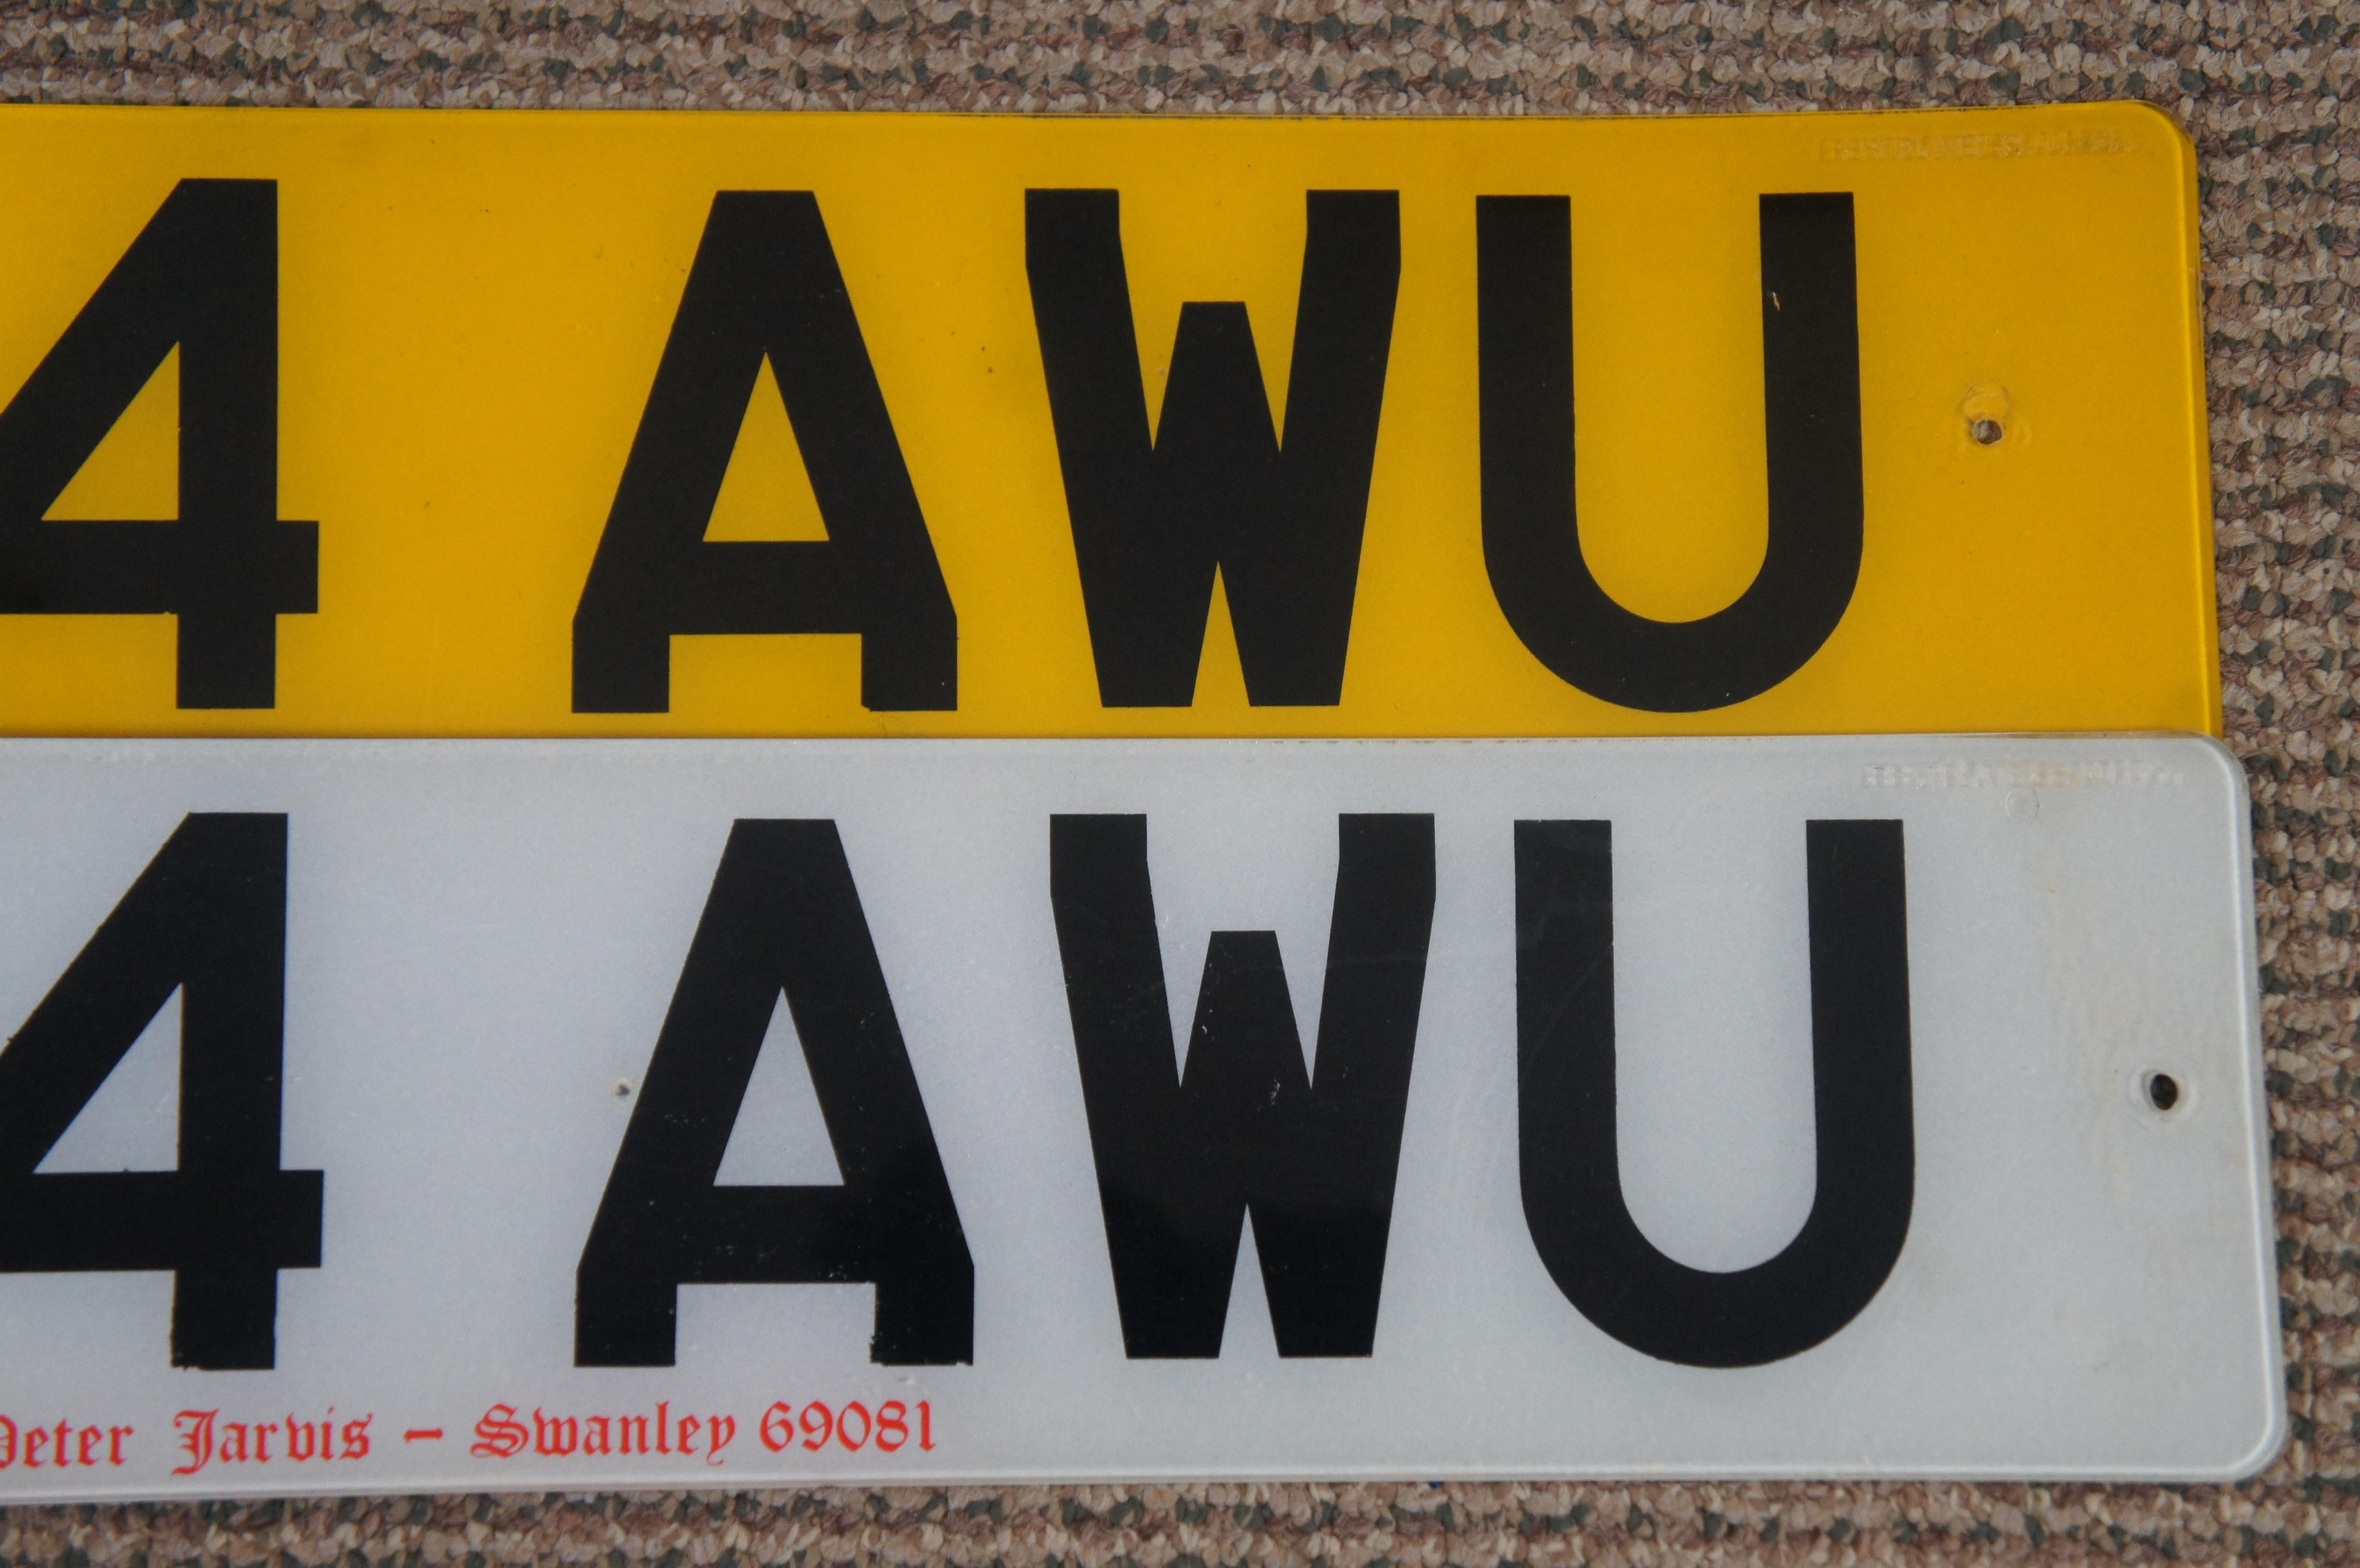 2 Peter Jarvis Euro Car Dealer Vehicle Registration License Plates Yellow White  3